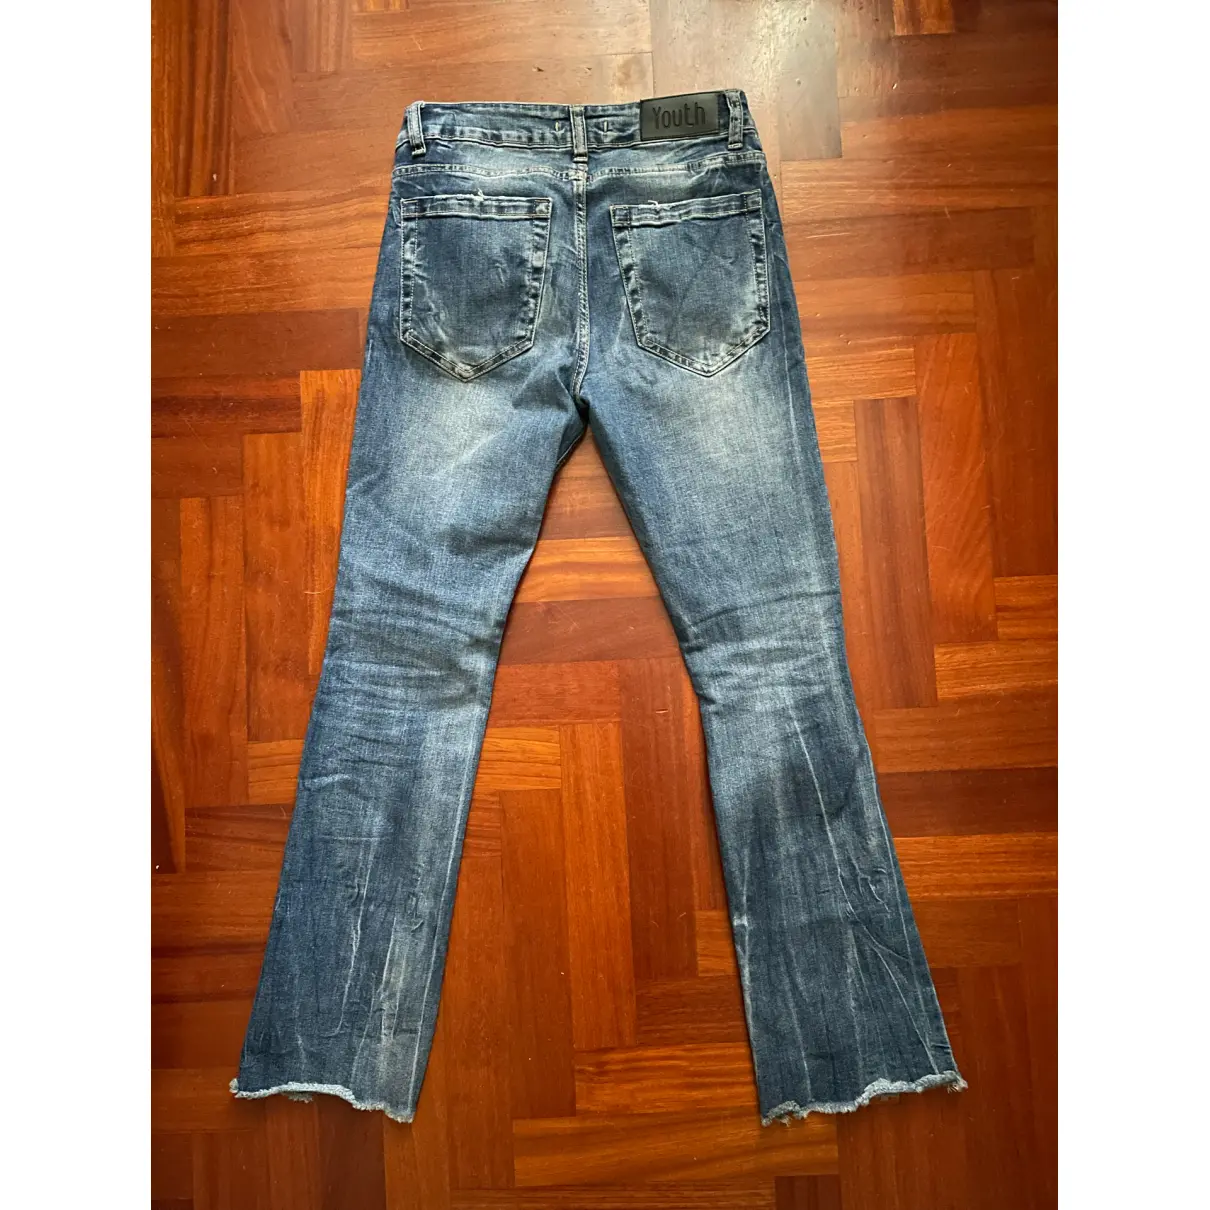 Buy Youth Jeans online